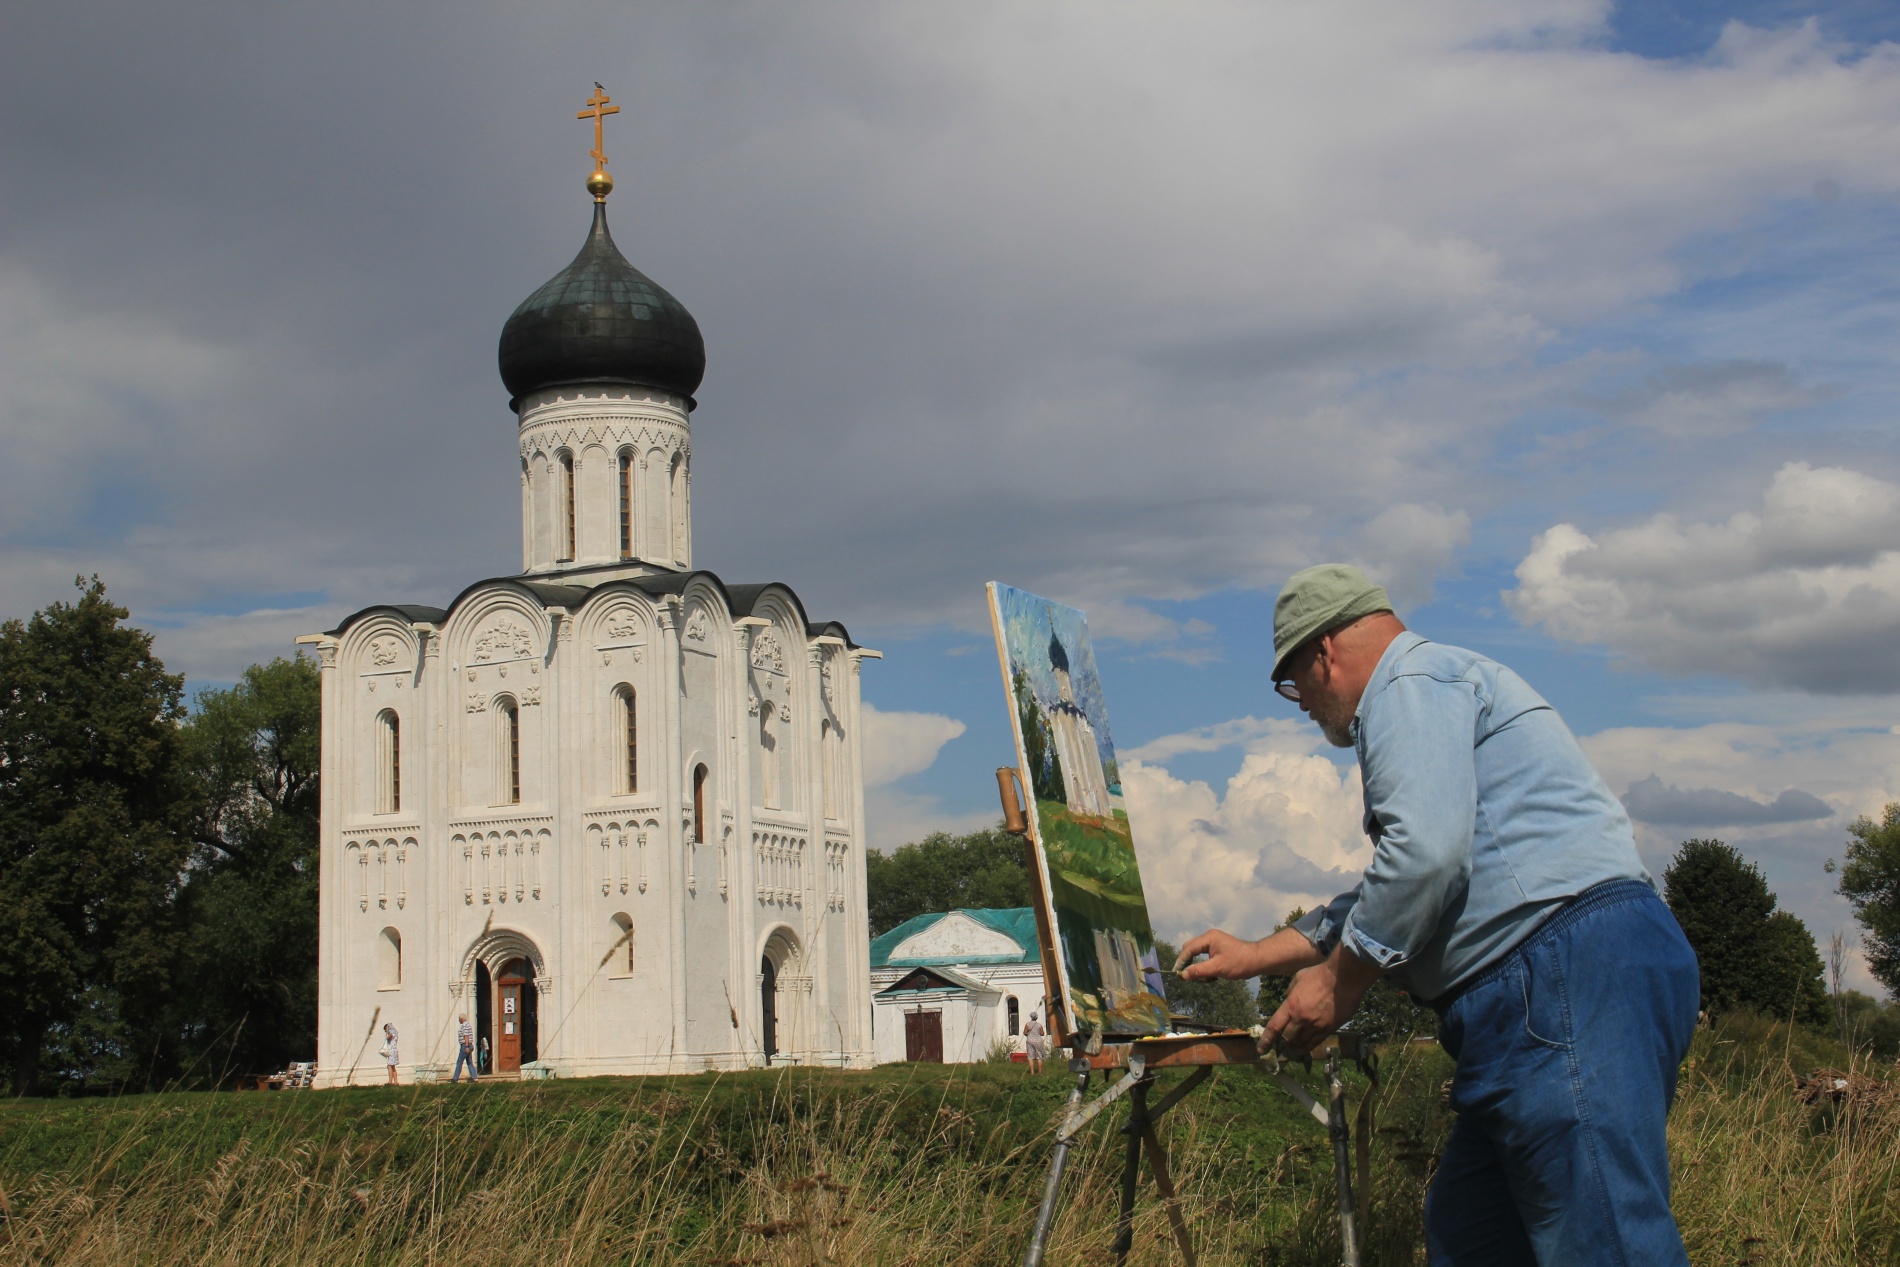 A Russian man paints the Church of the Intercession of the Holy Virgin on the Nerl River near Vladimir, Russia.